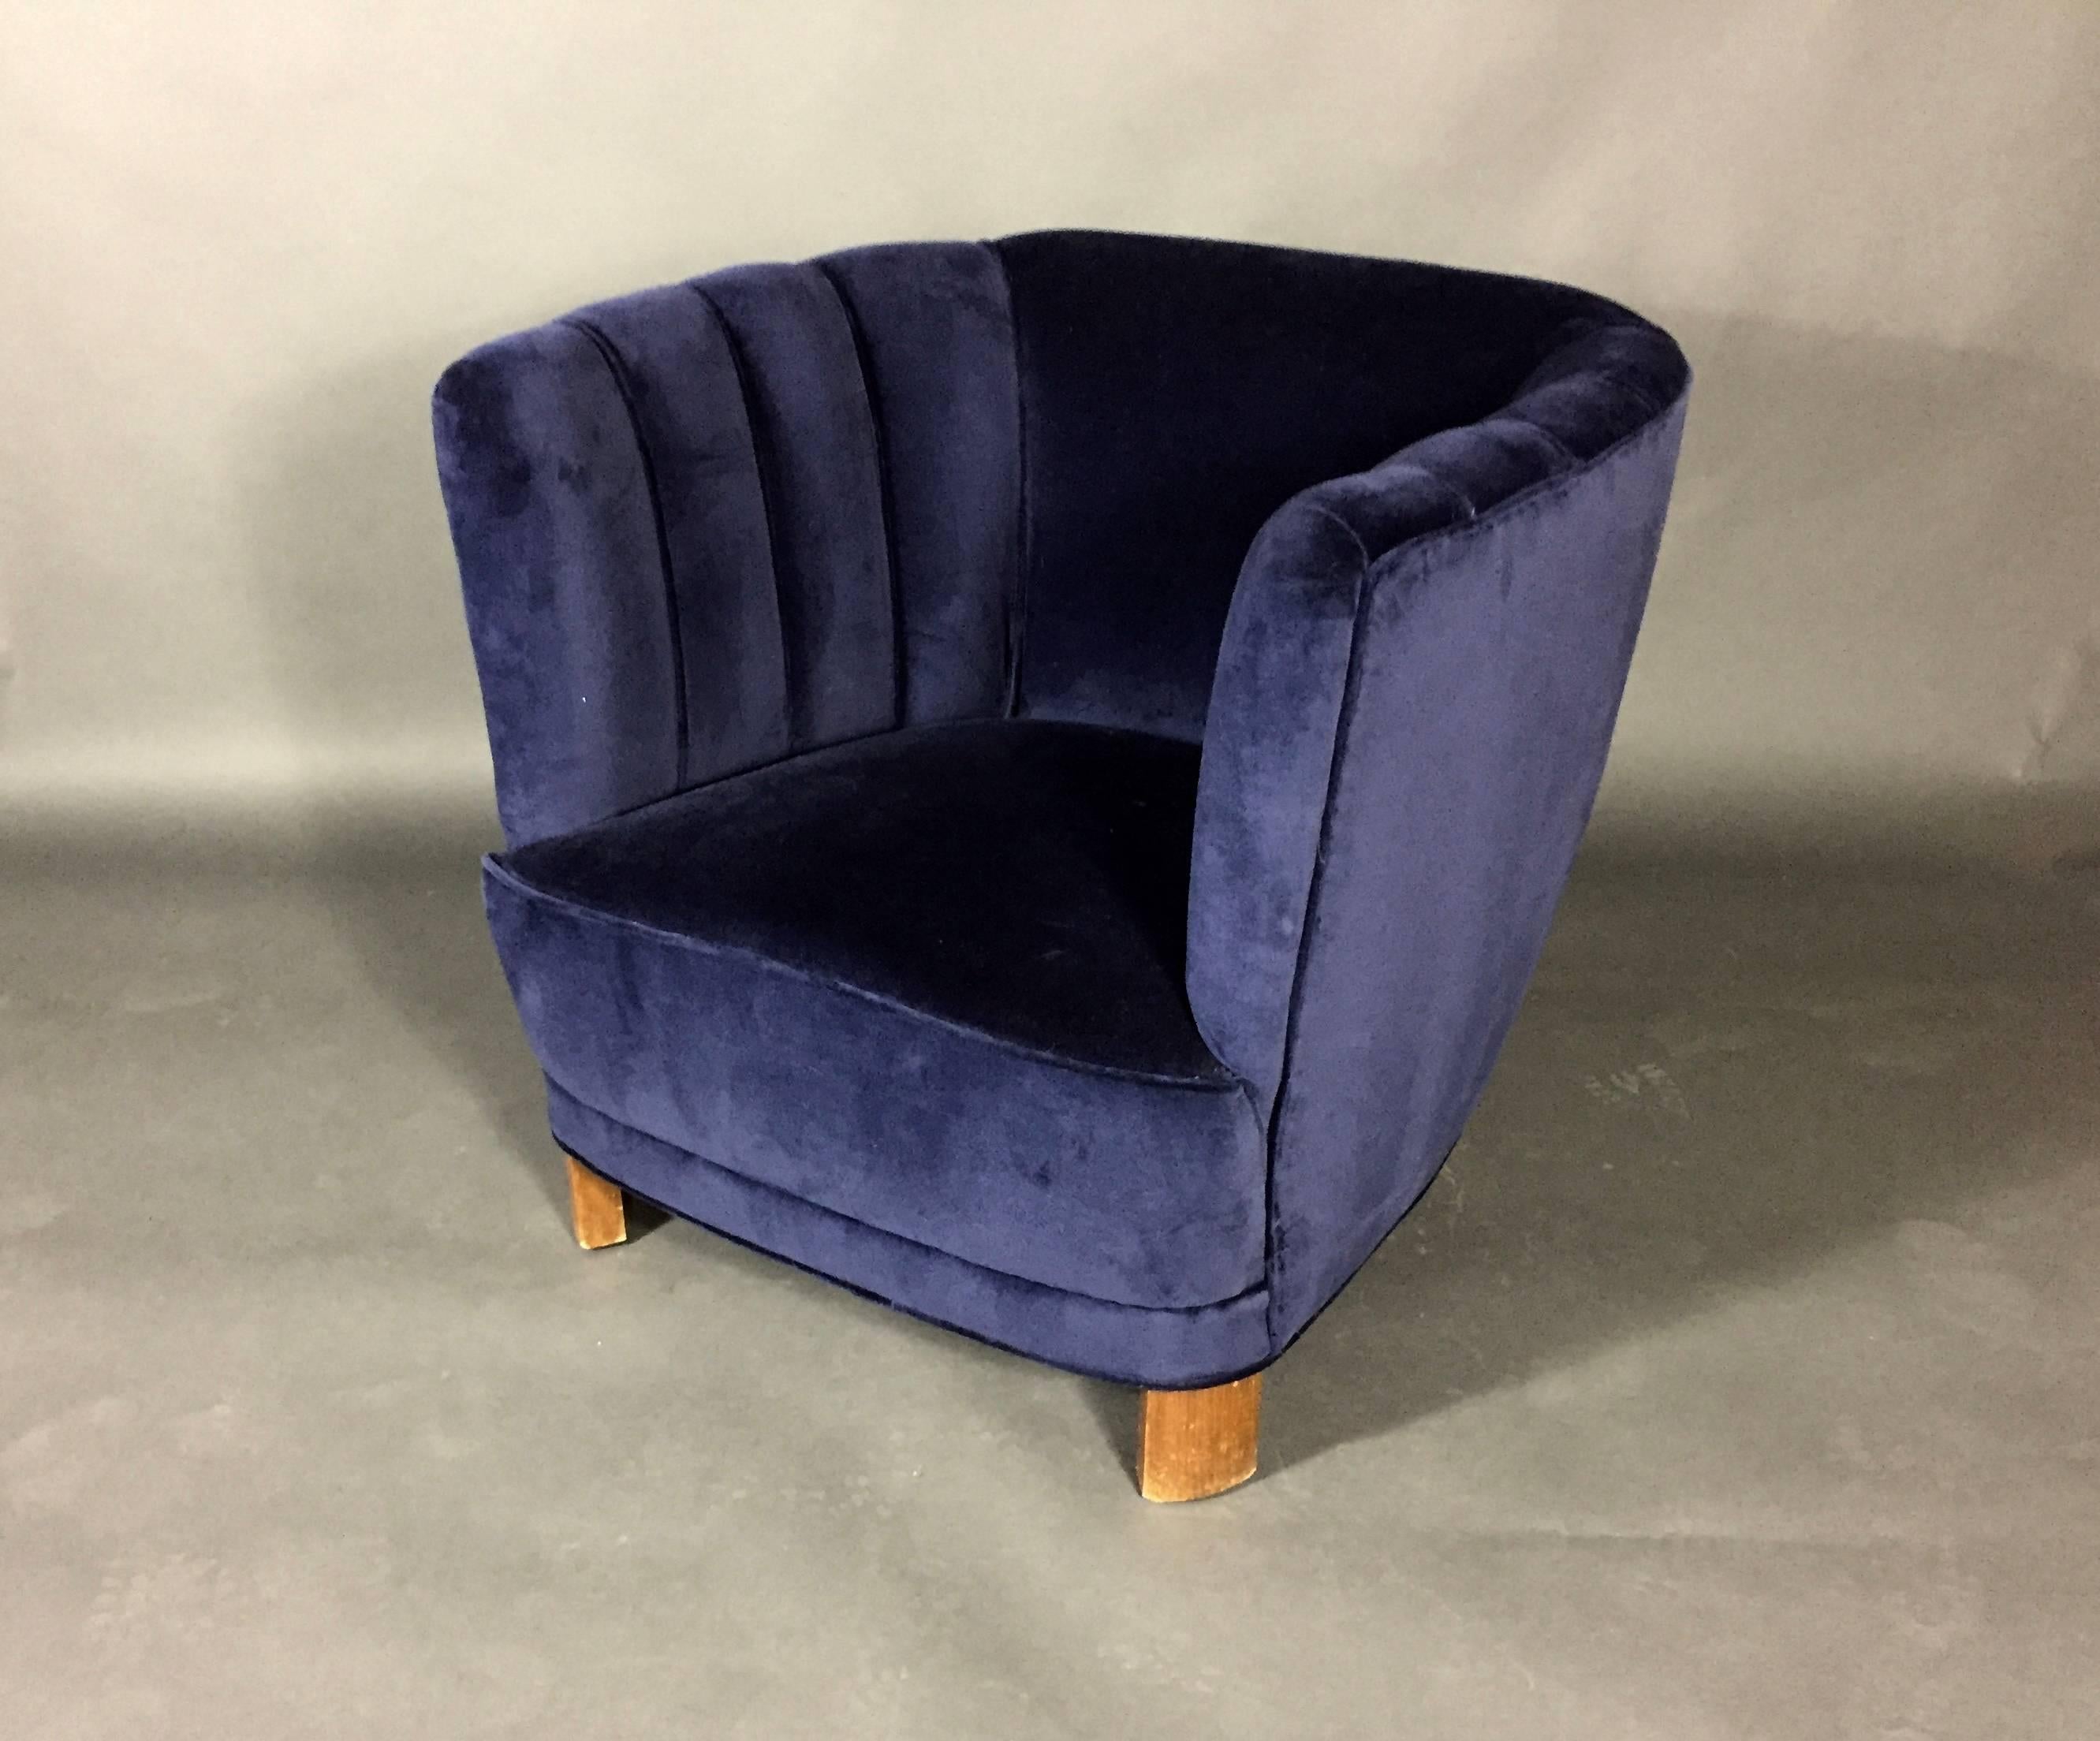 Gorgeous Danish club chair from late 1930s-early1940s recently updated with Moode NYC navy velvet. Curved front legs typical of the period and original back upholstered channels.